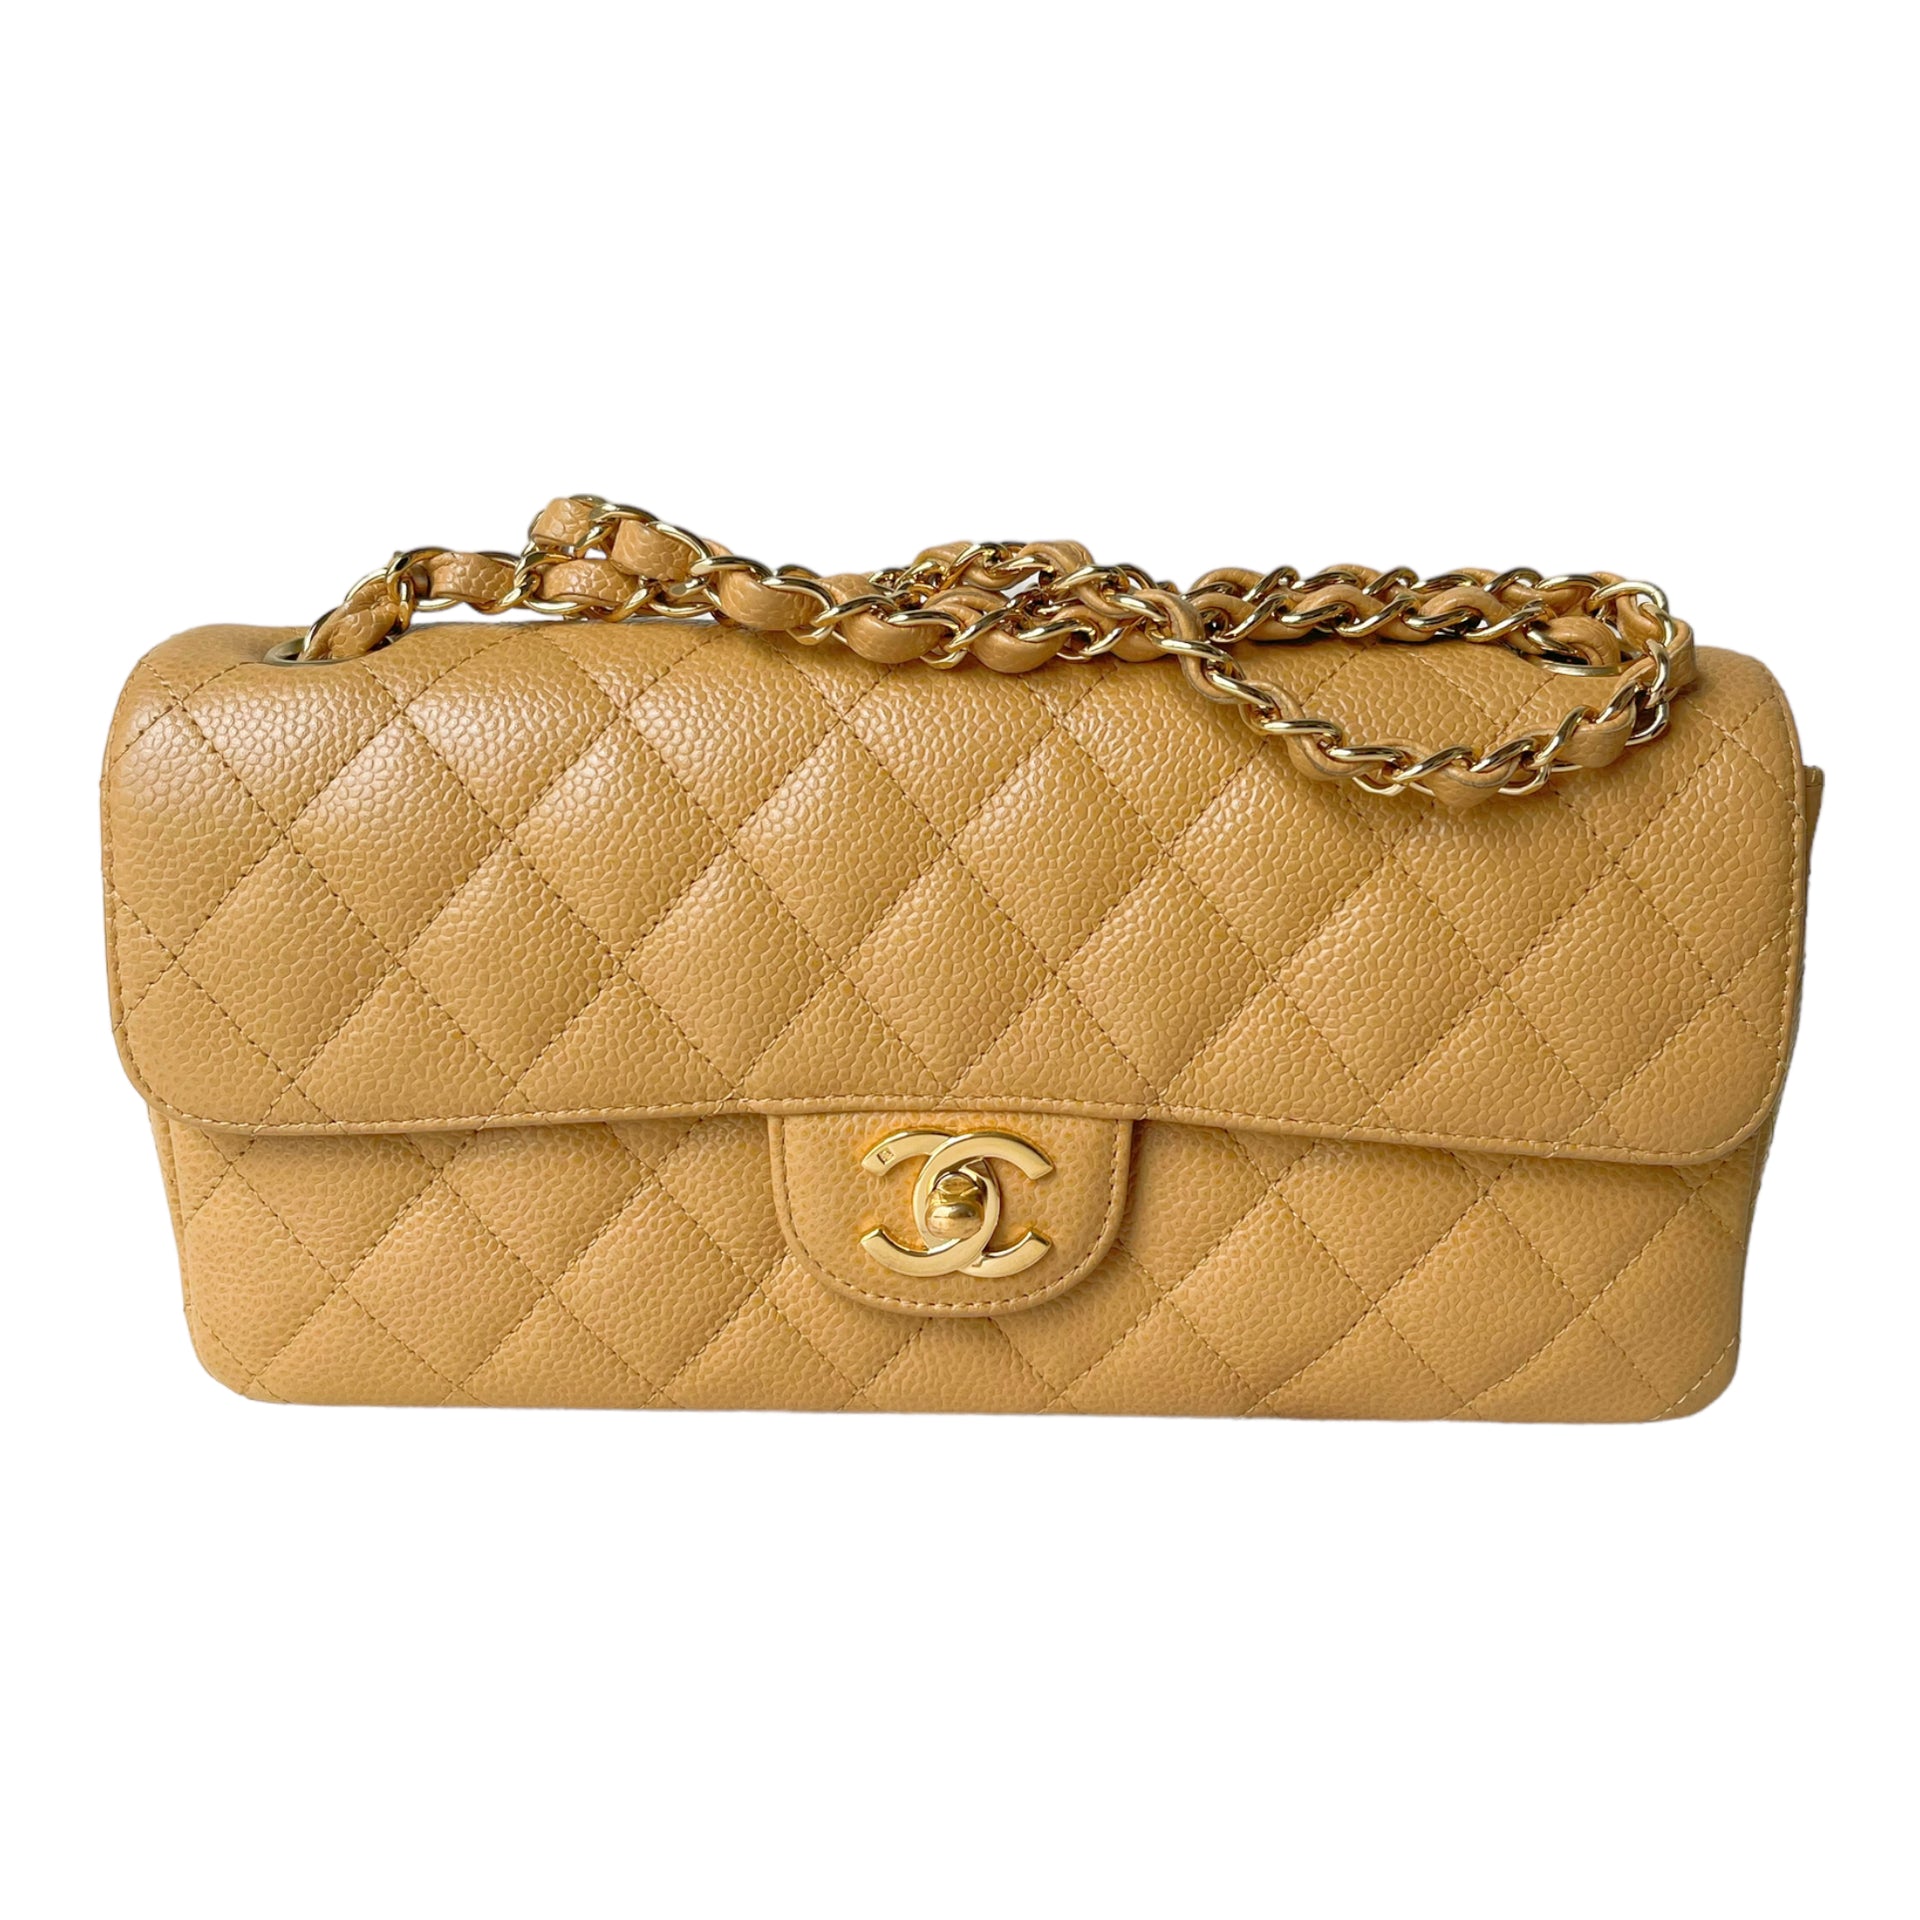 CHANEL Caviar Quilted East West Flap Beige Clair 198471